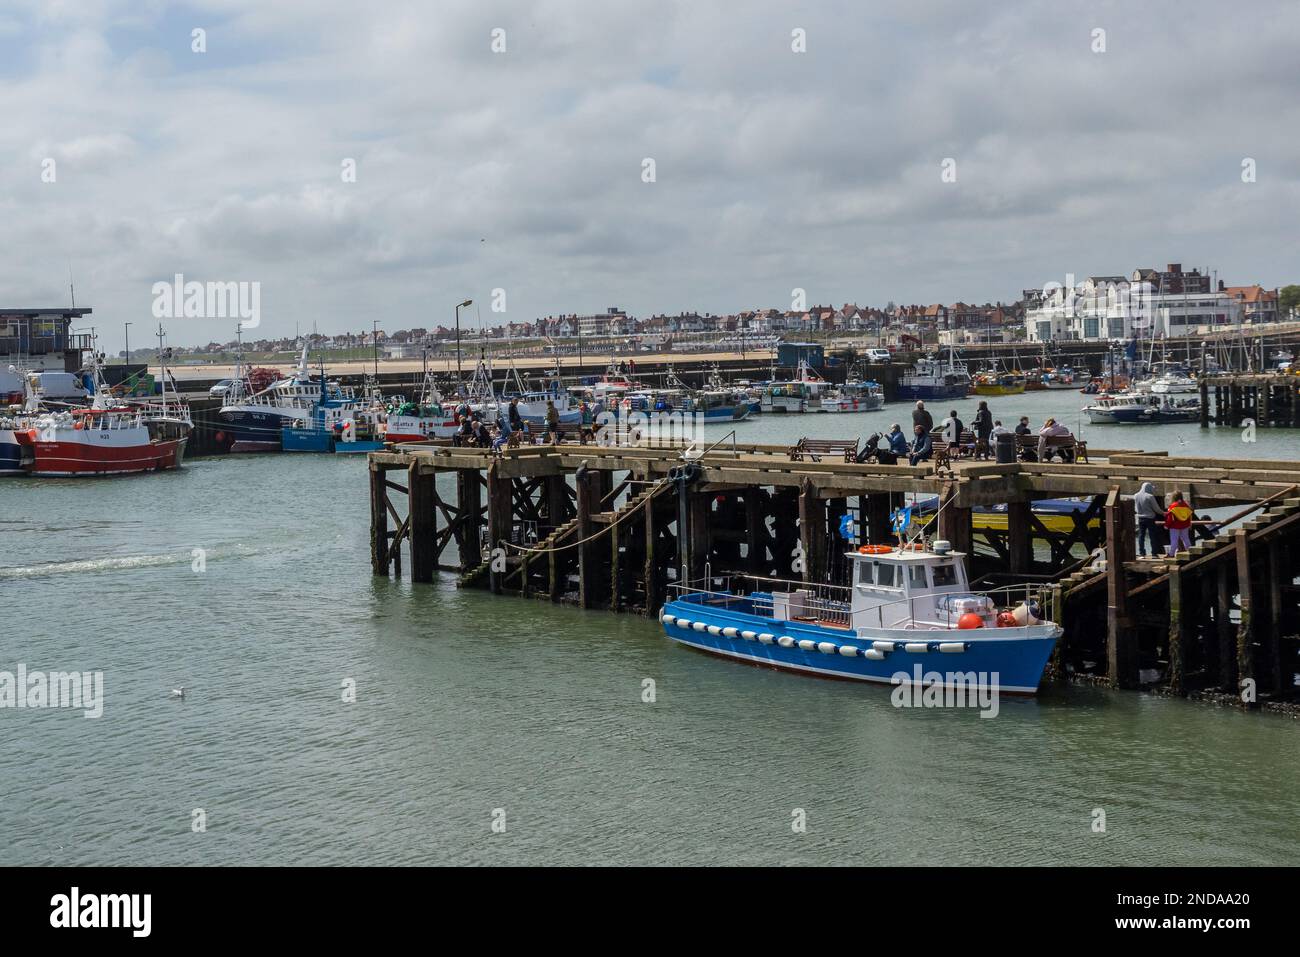 Bridlington is a coastal town on the Coast of the North Sea in the East Riding of Yorkshire, England. Stock Photo